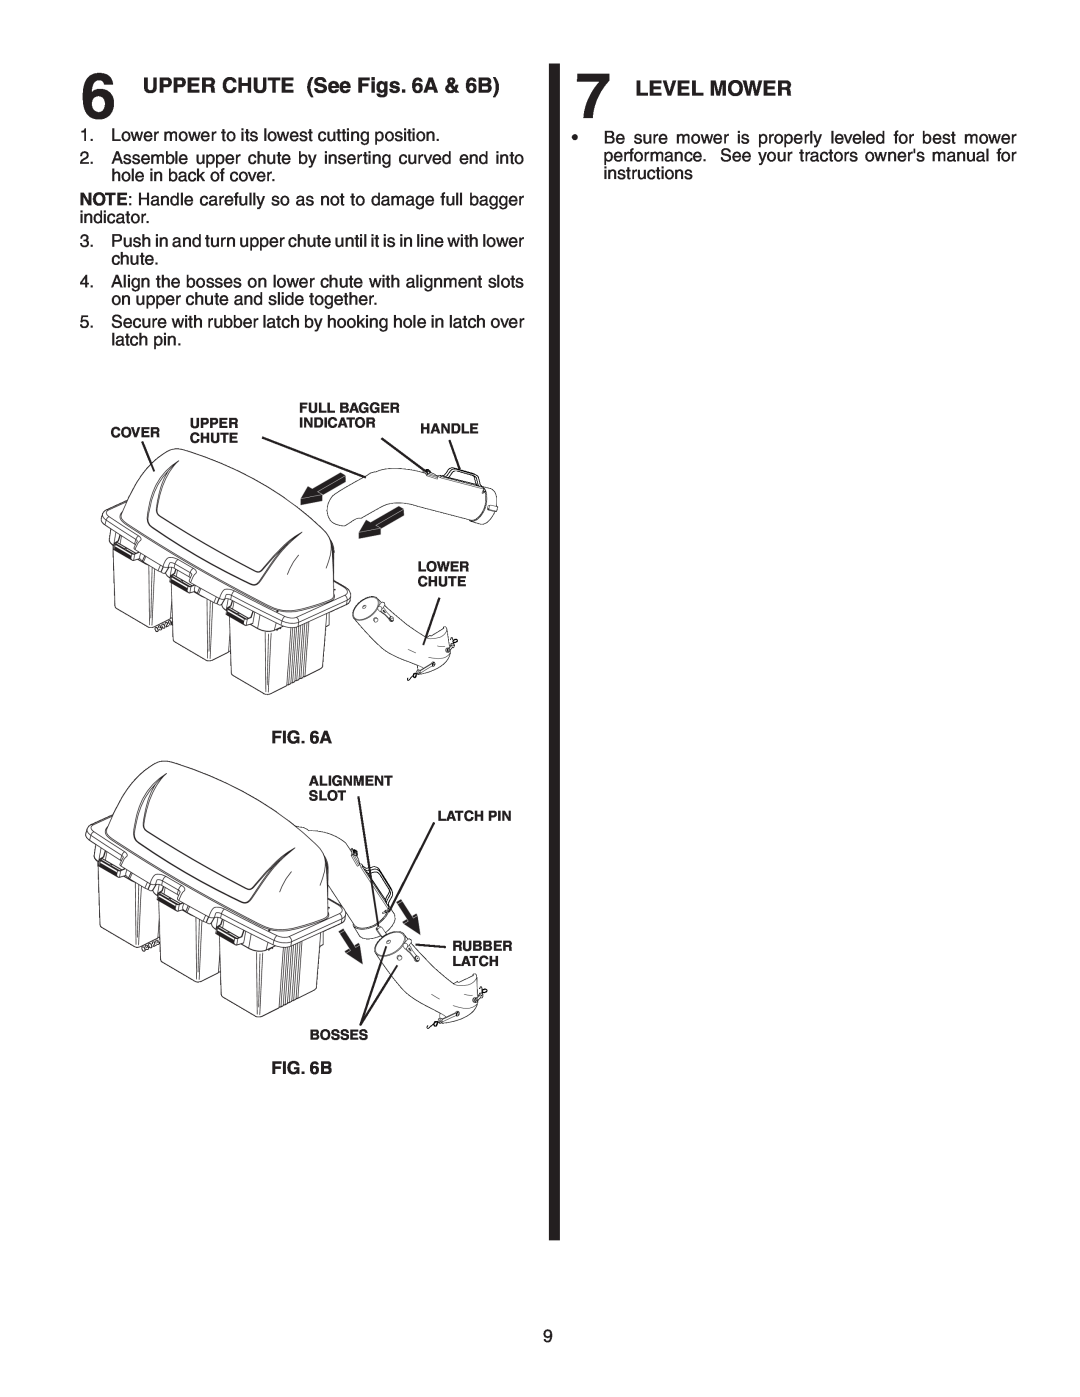 Poulan QCT342, 960 72 00-07, 402337 owner manual UPPER CHUTE See Figs. 6A & 6B, Level Mower 